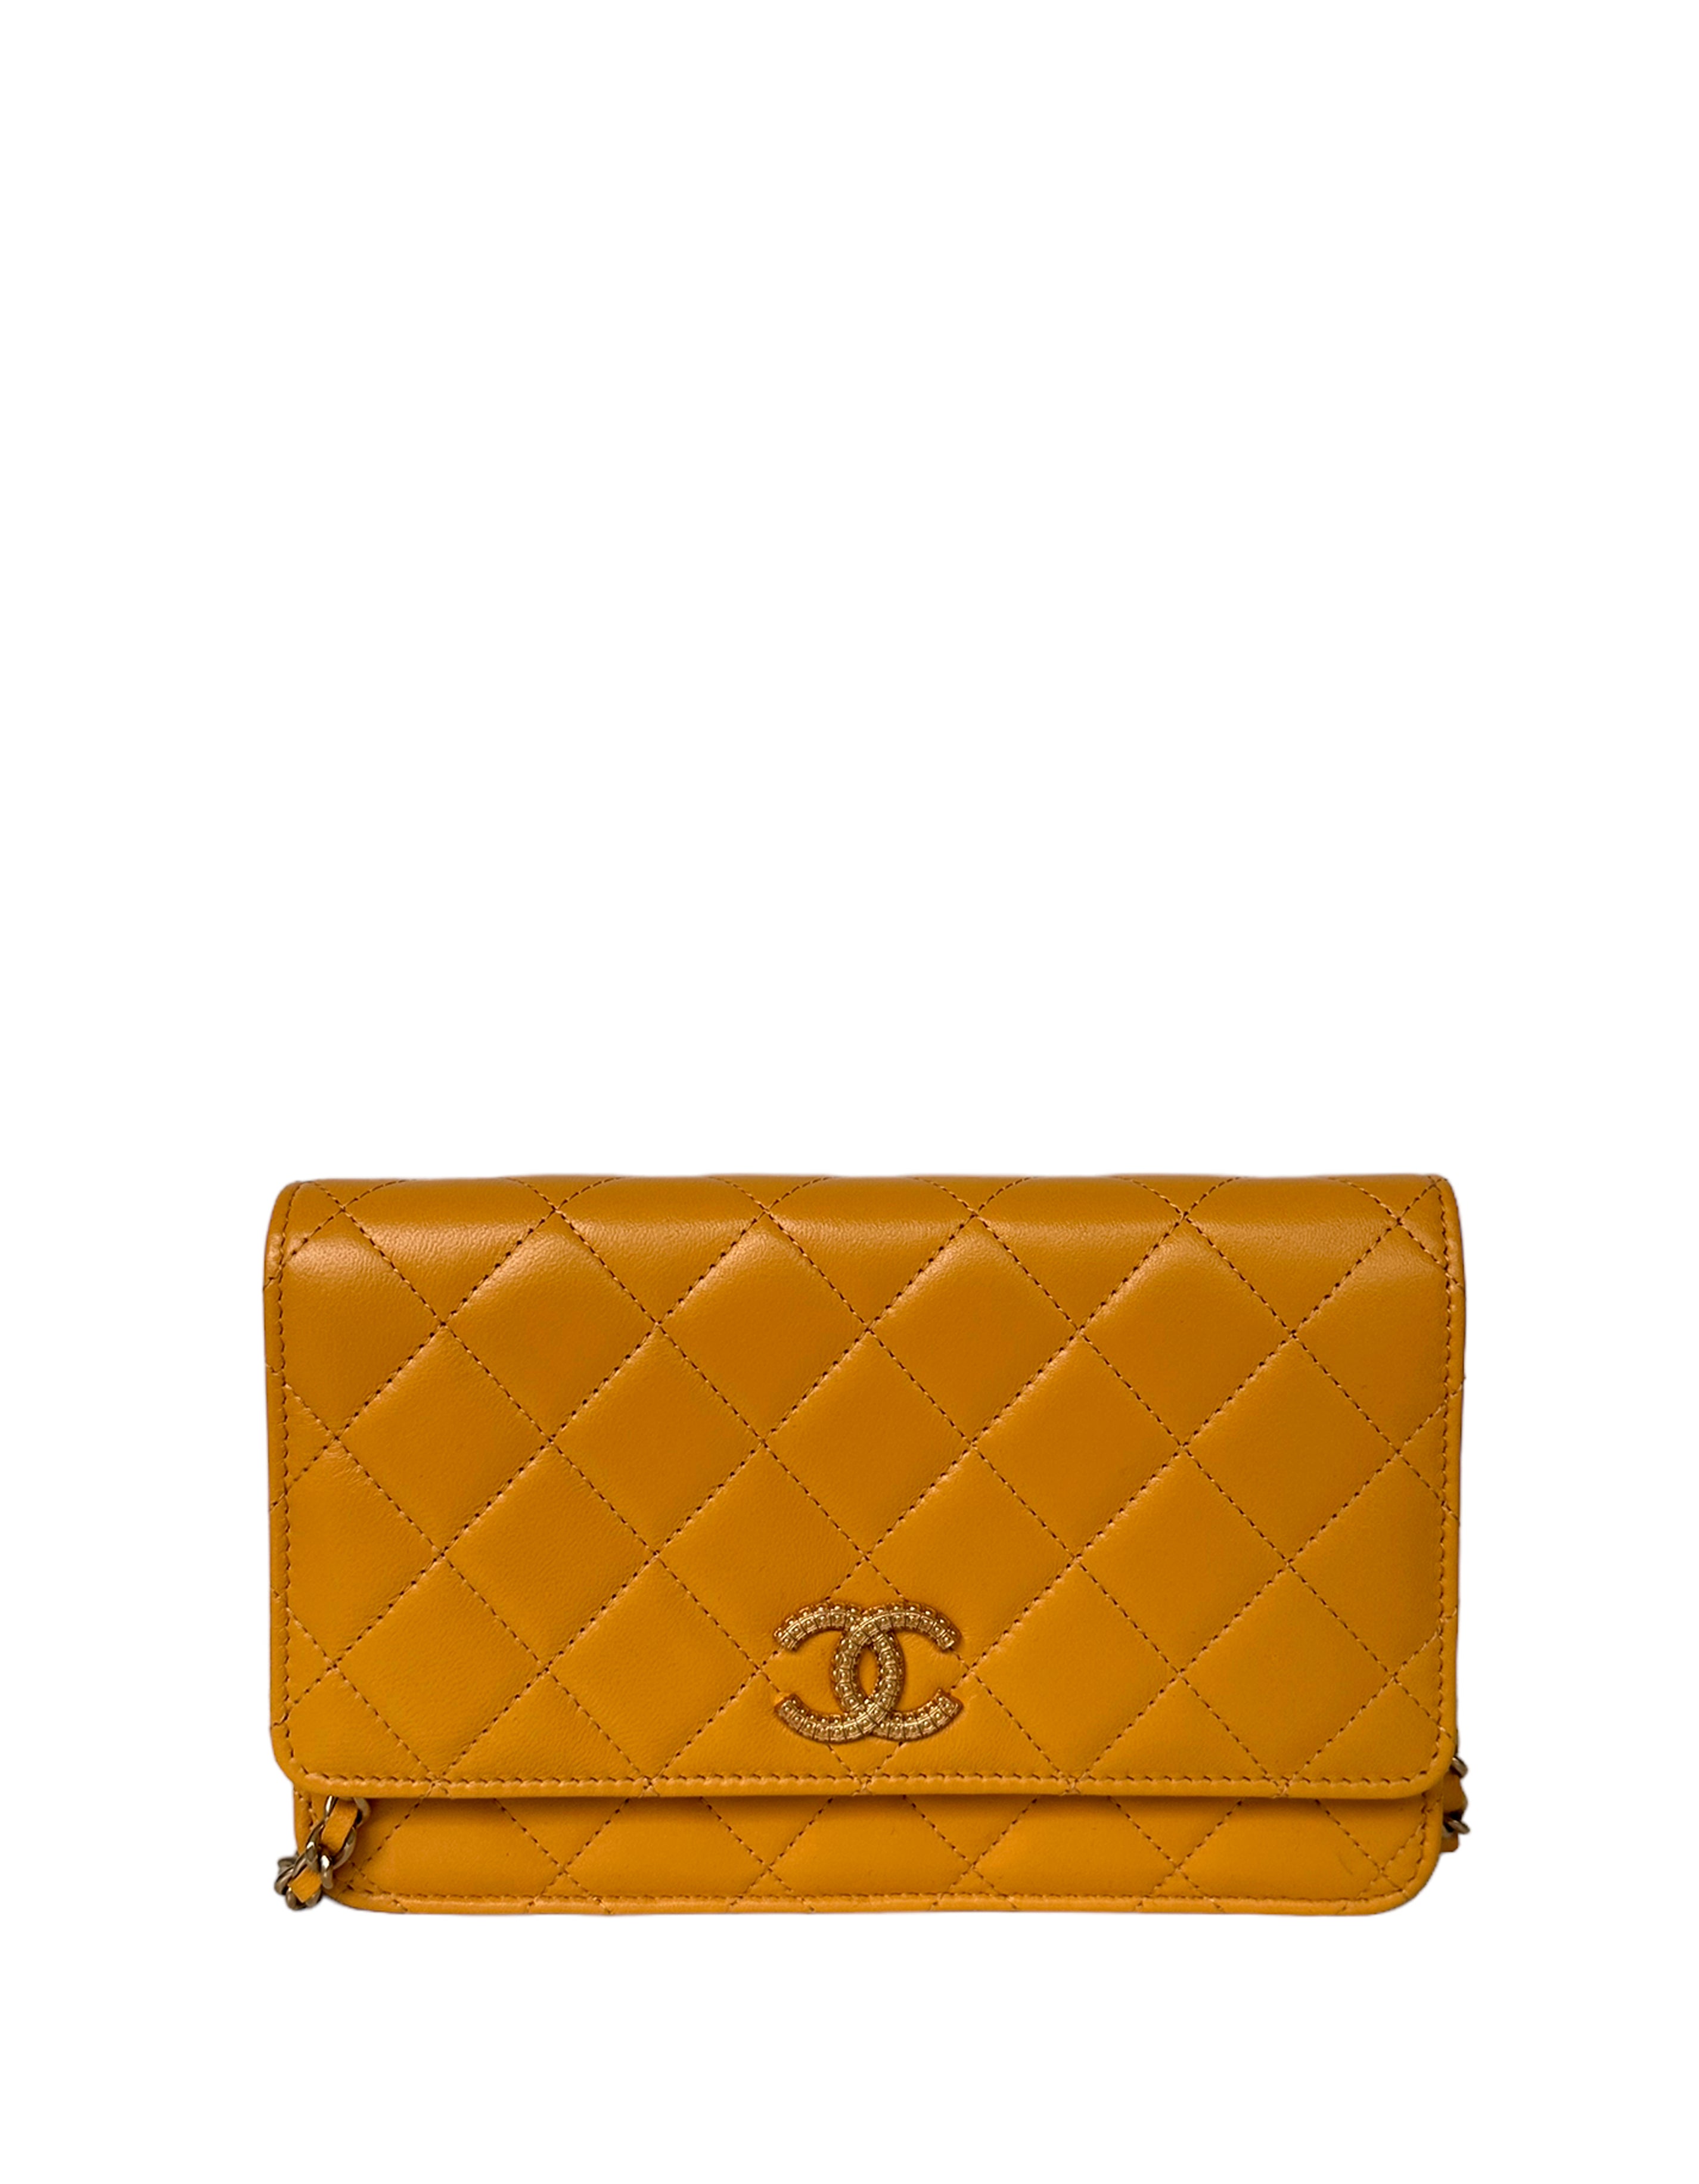 Iconic Piece Bag from Chanel, Gallery posted by Elliah Zoie